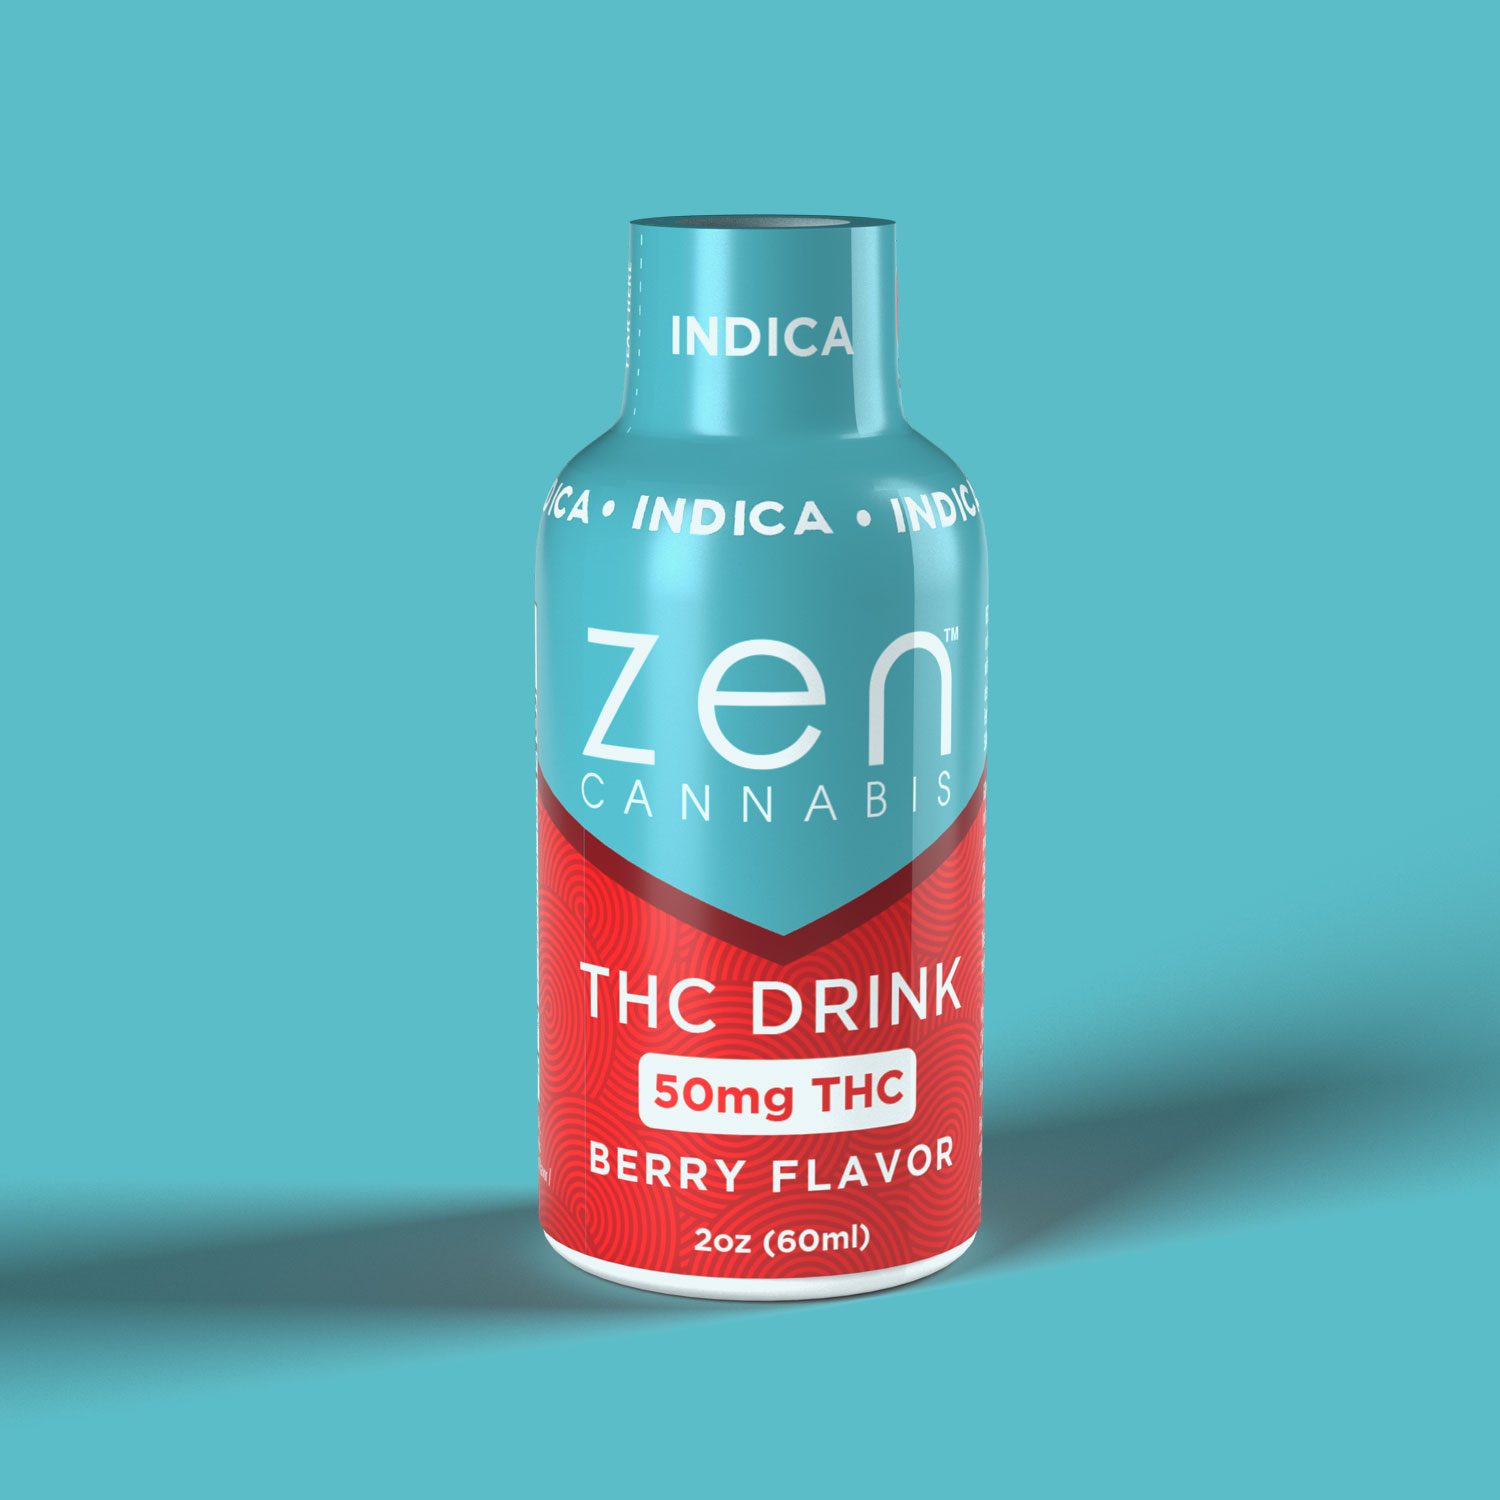 INDICA | 50mg THC
A two-ounce burst of delicious sweet berry flavor to melt your aches and pains away and help you relax. This indica drink will quell any aches or pains and help you unwind and find your zen.

50mg THC per bottle | 2oz (60ml)